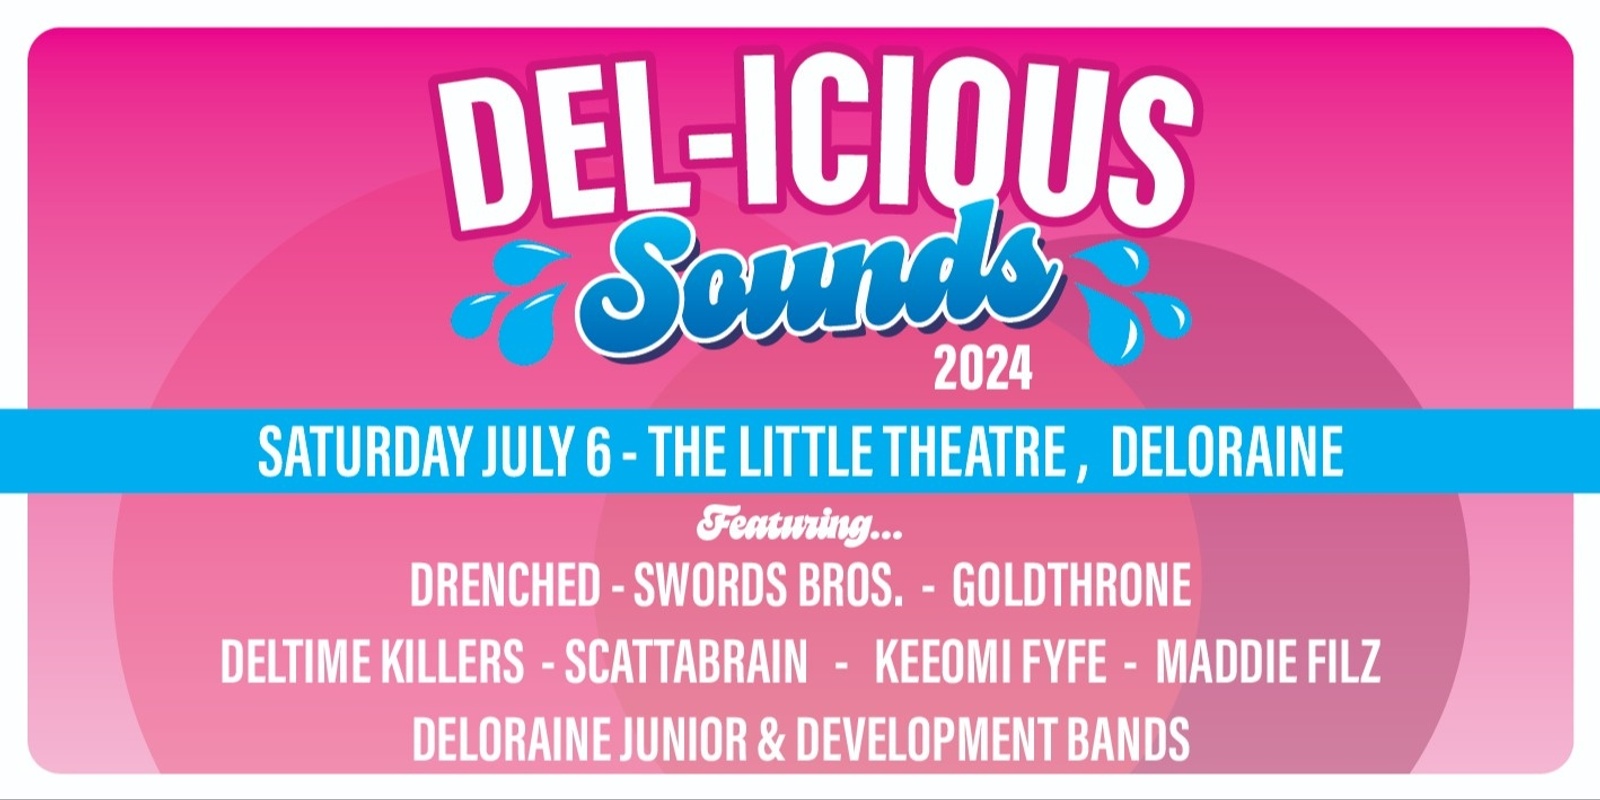 Banner image for Del-icious Sounds 2024